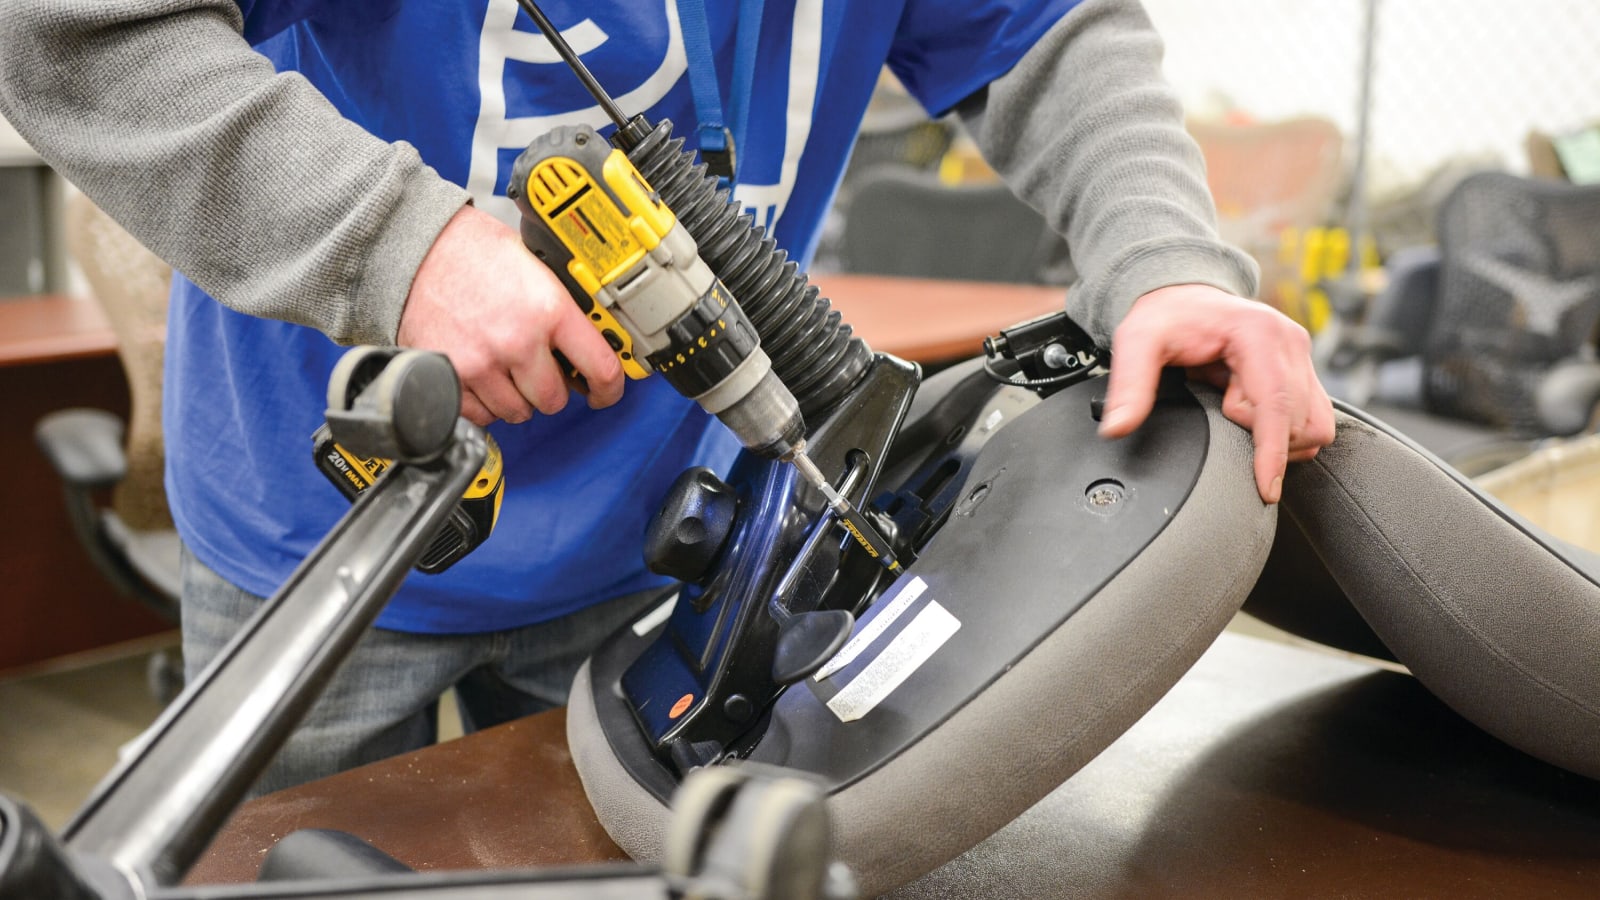 A close-up view of a person holding the bottom, underside, section of an office chair and using a drill to secure parts during assembly.